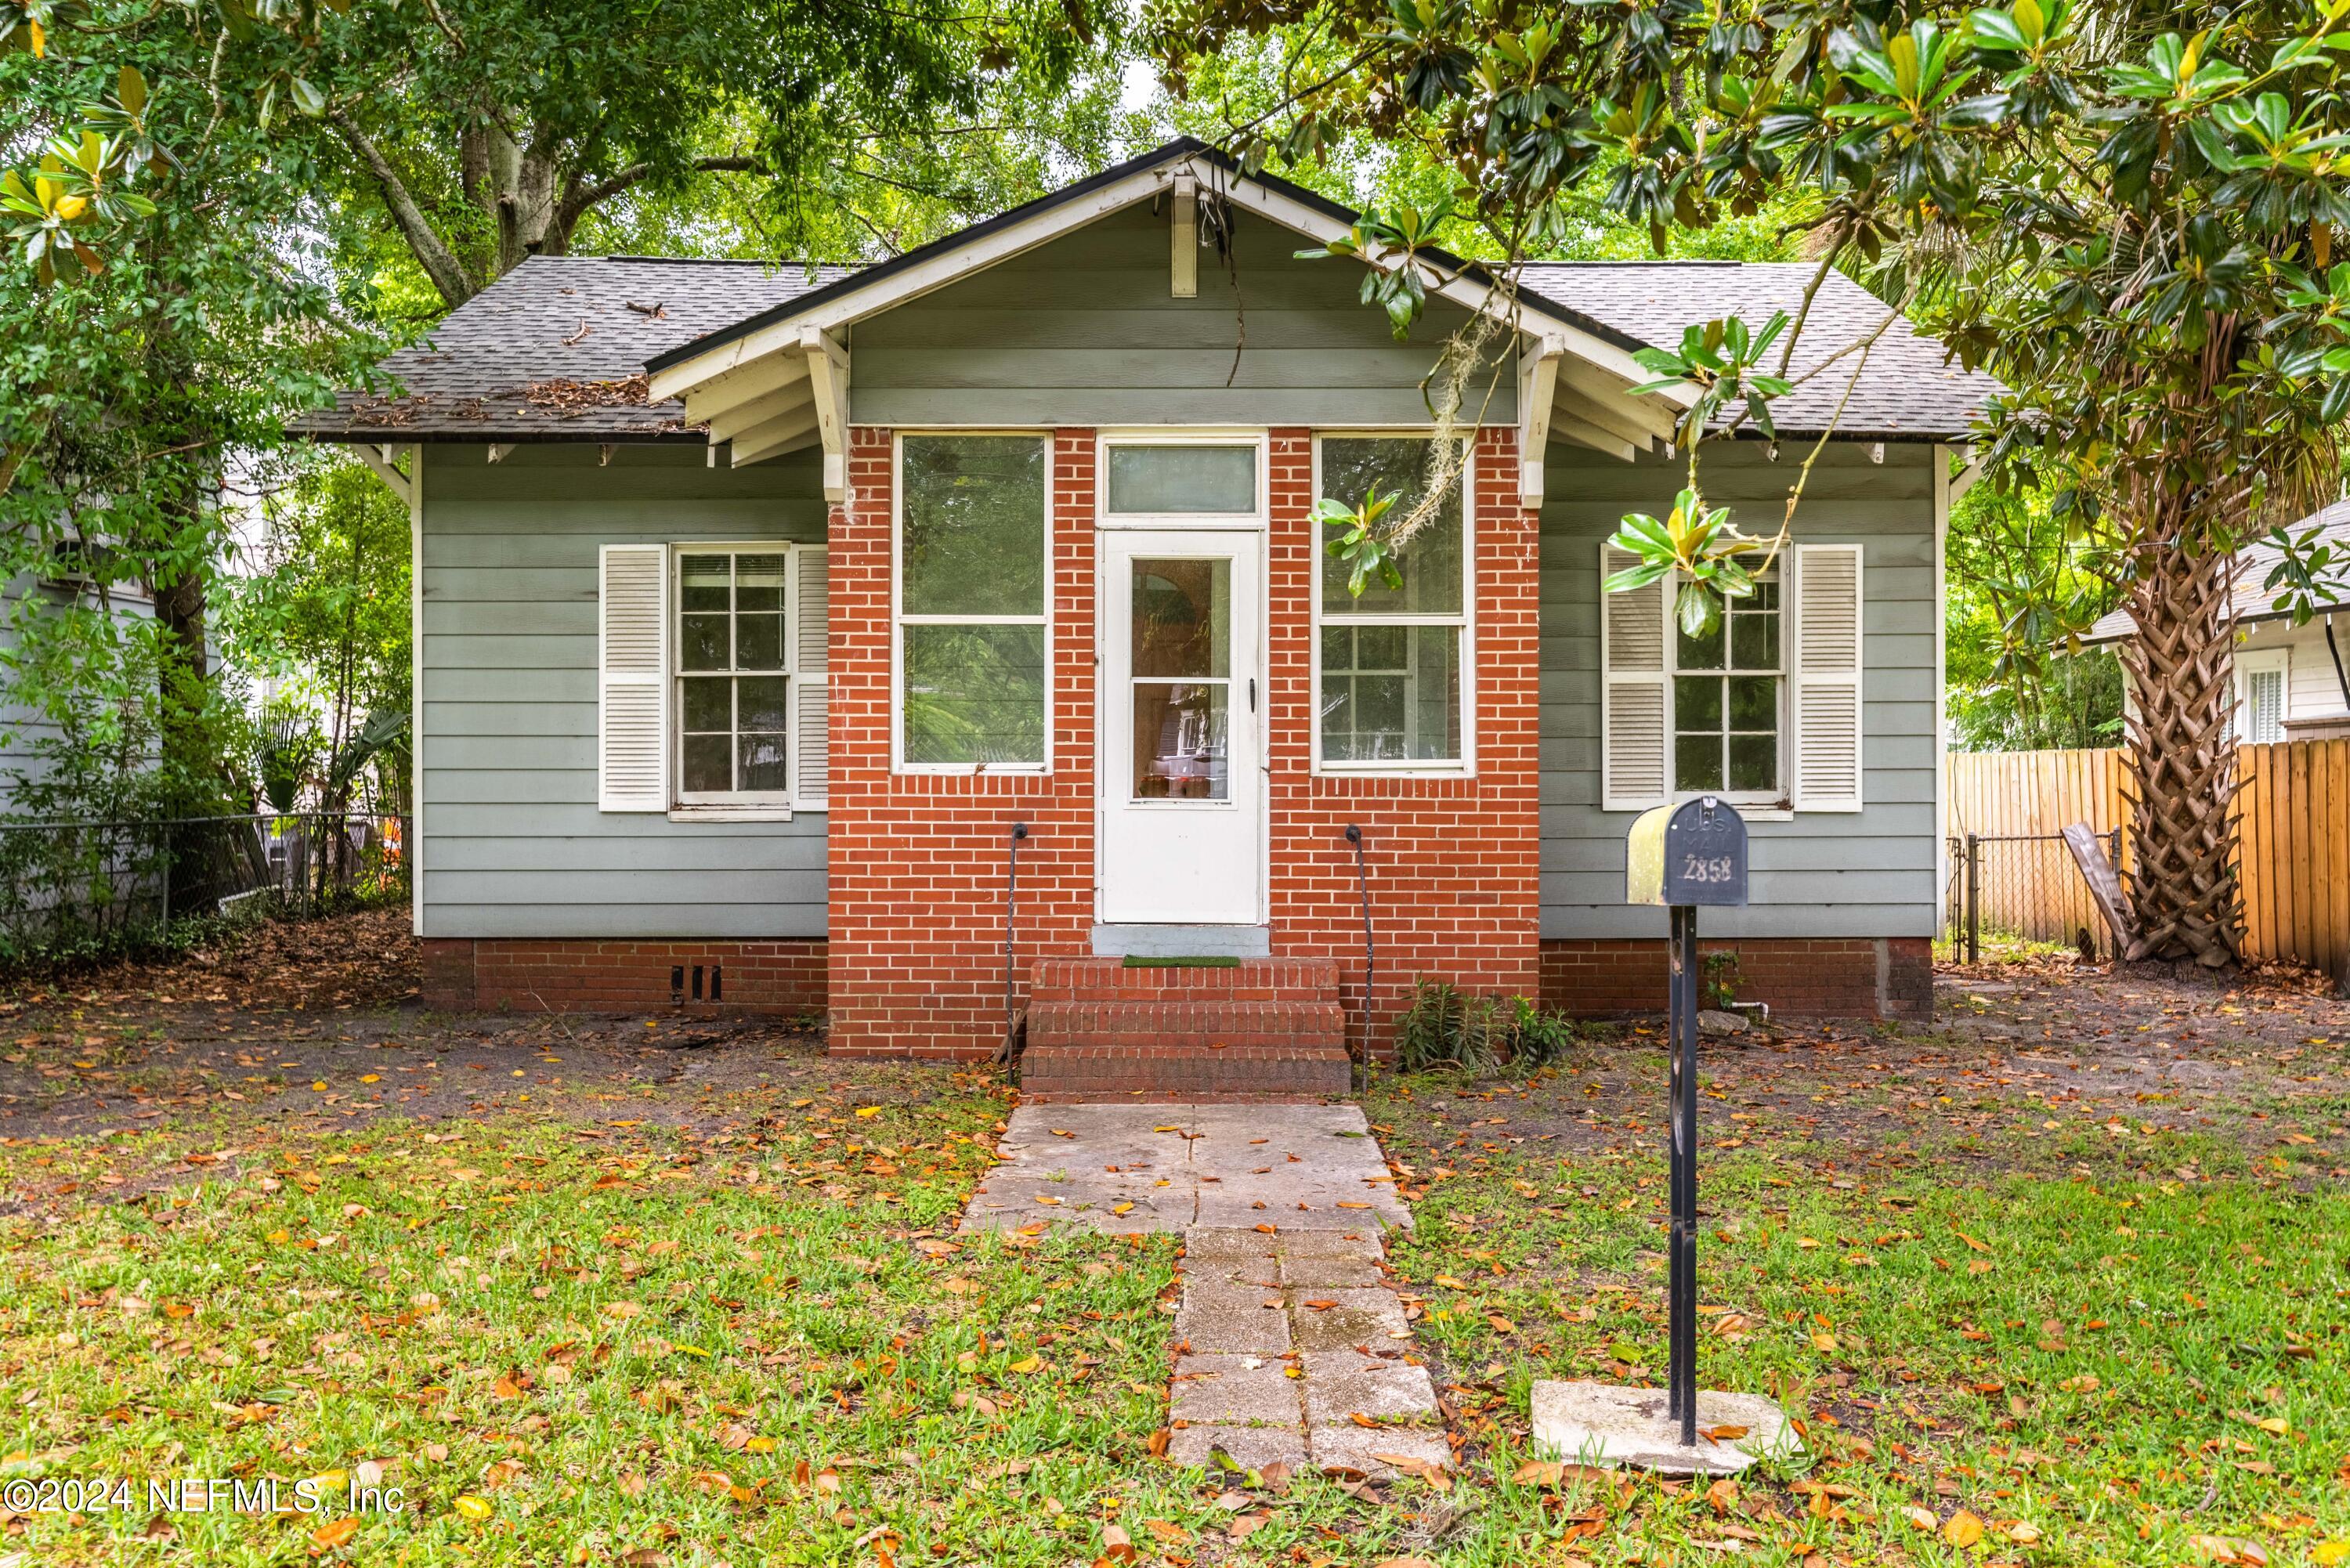 Jacksonville, FL home for sale located at 2858 Downing Street, Jacksonville, FL 32205